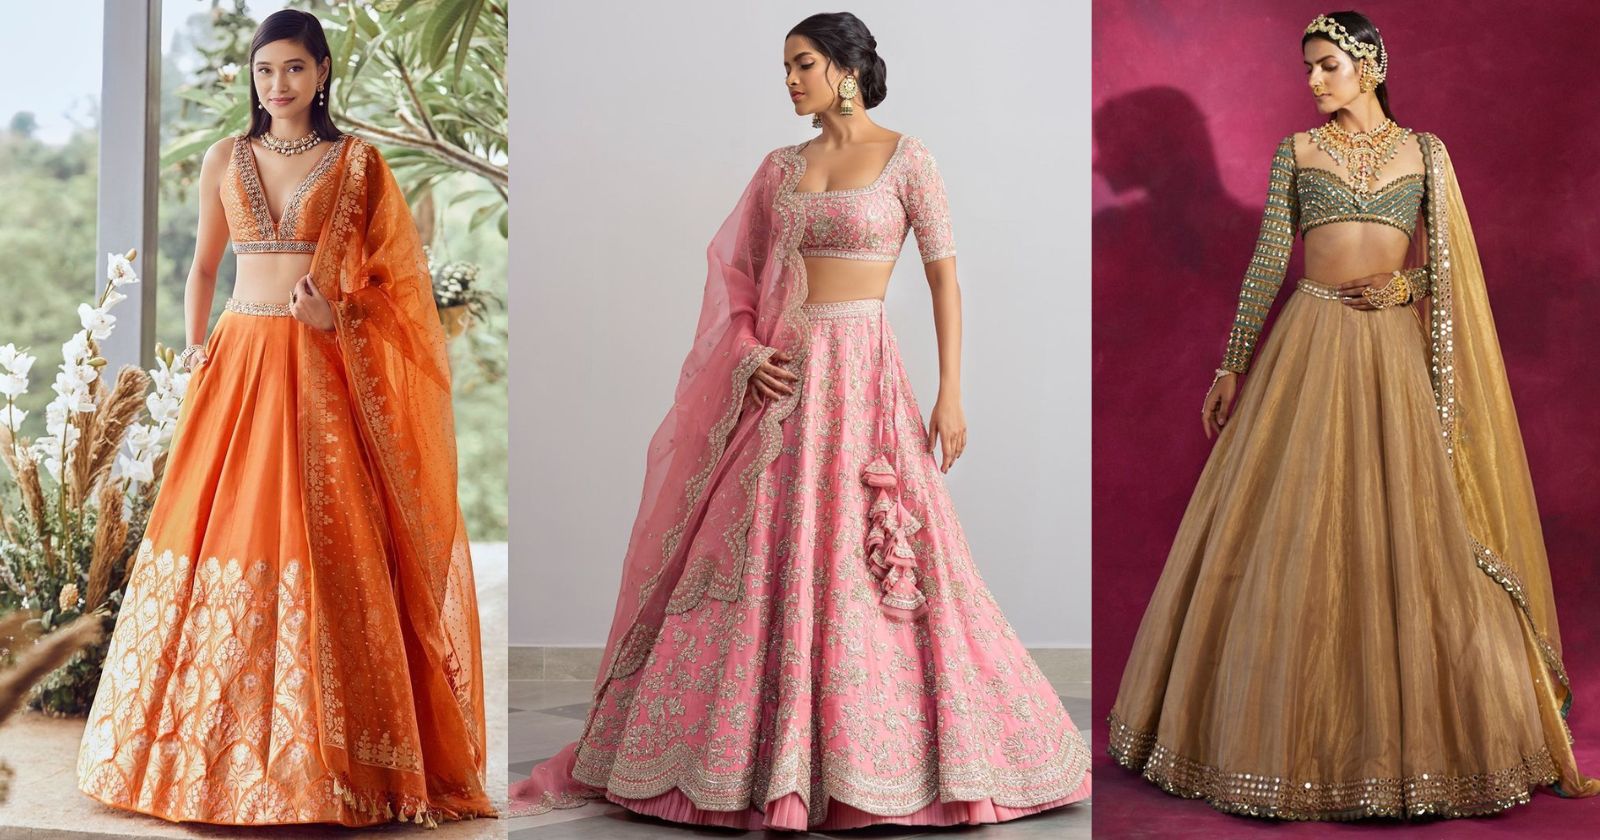 You are currently viewing 30+ Engagement Lehenga Designs For Beautiful Bride